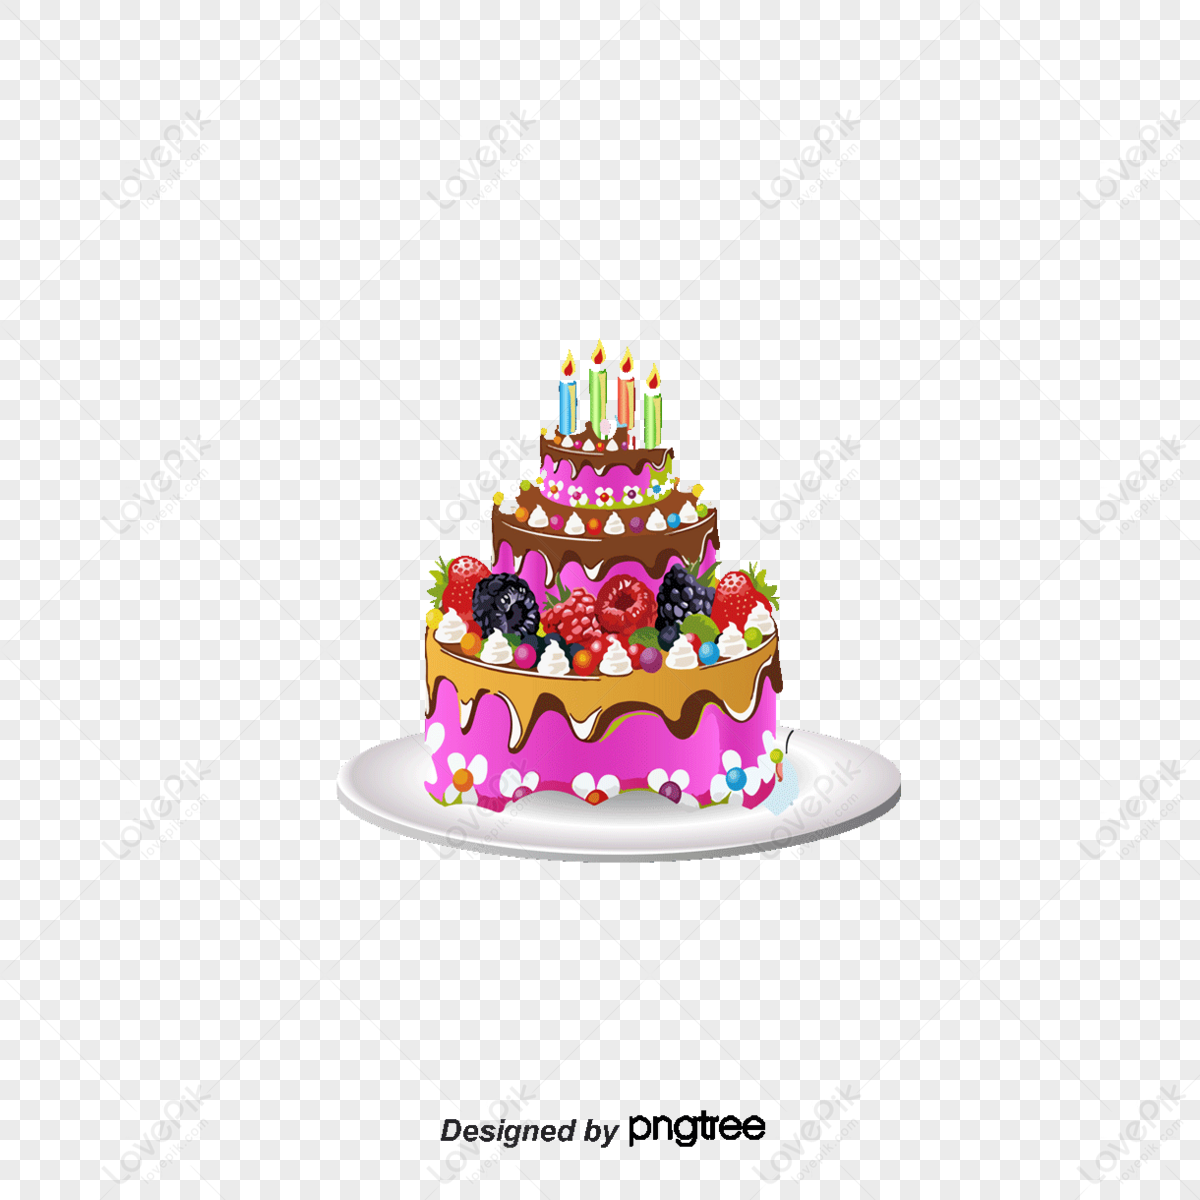 Celebrate With Delectable Birthday Cake Backgrounds | 123freevectors